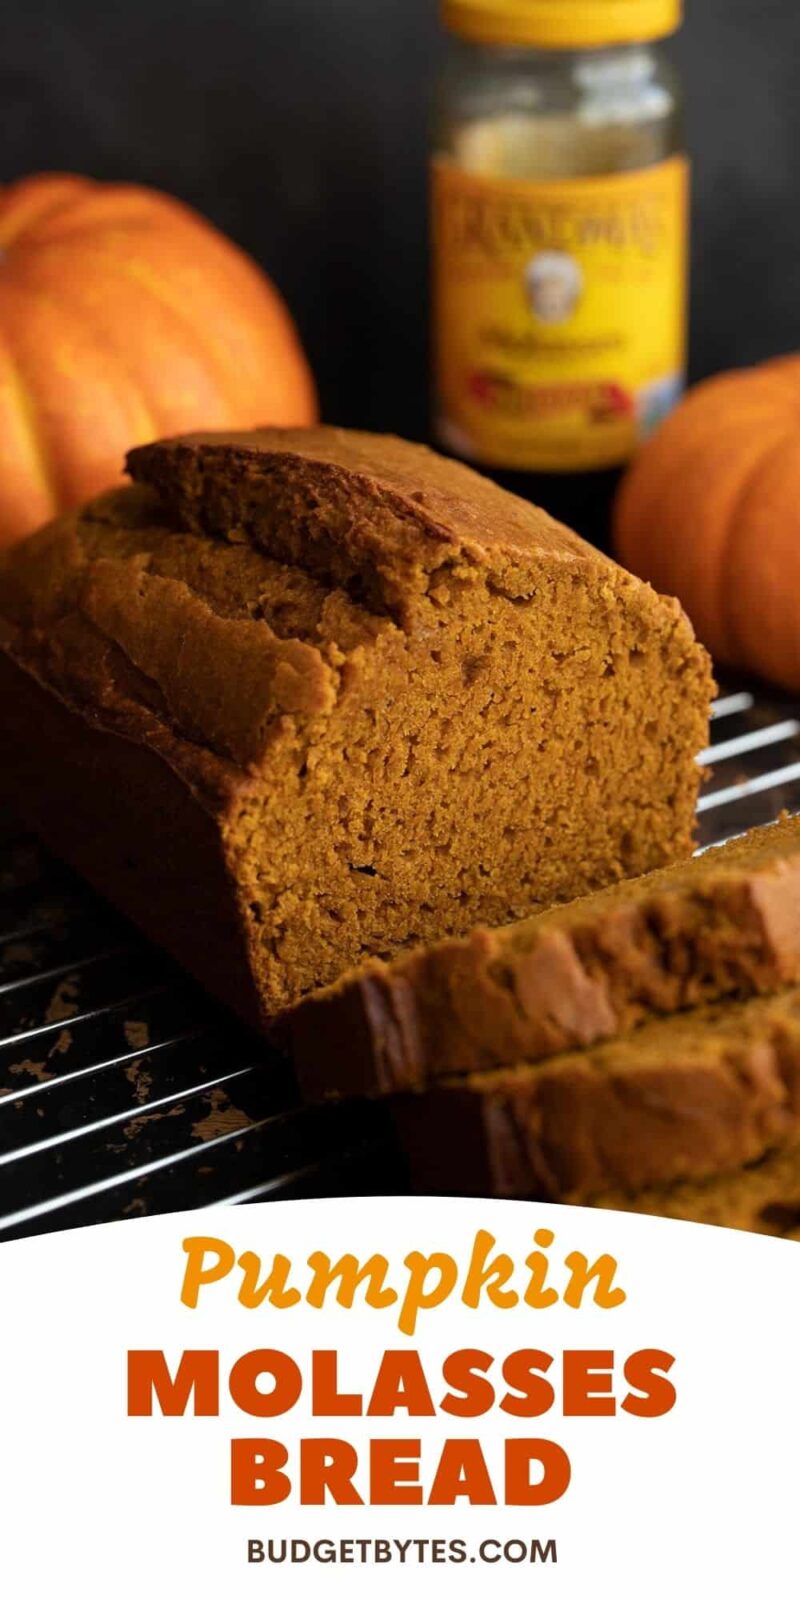 Side view of a sliced loaf of pumpkin molasses bread, title text at the bottom